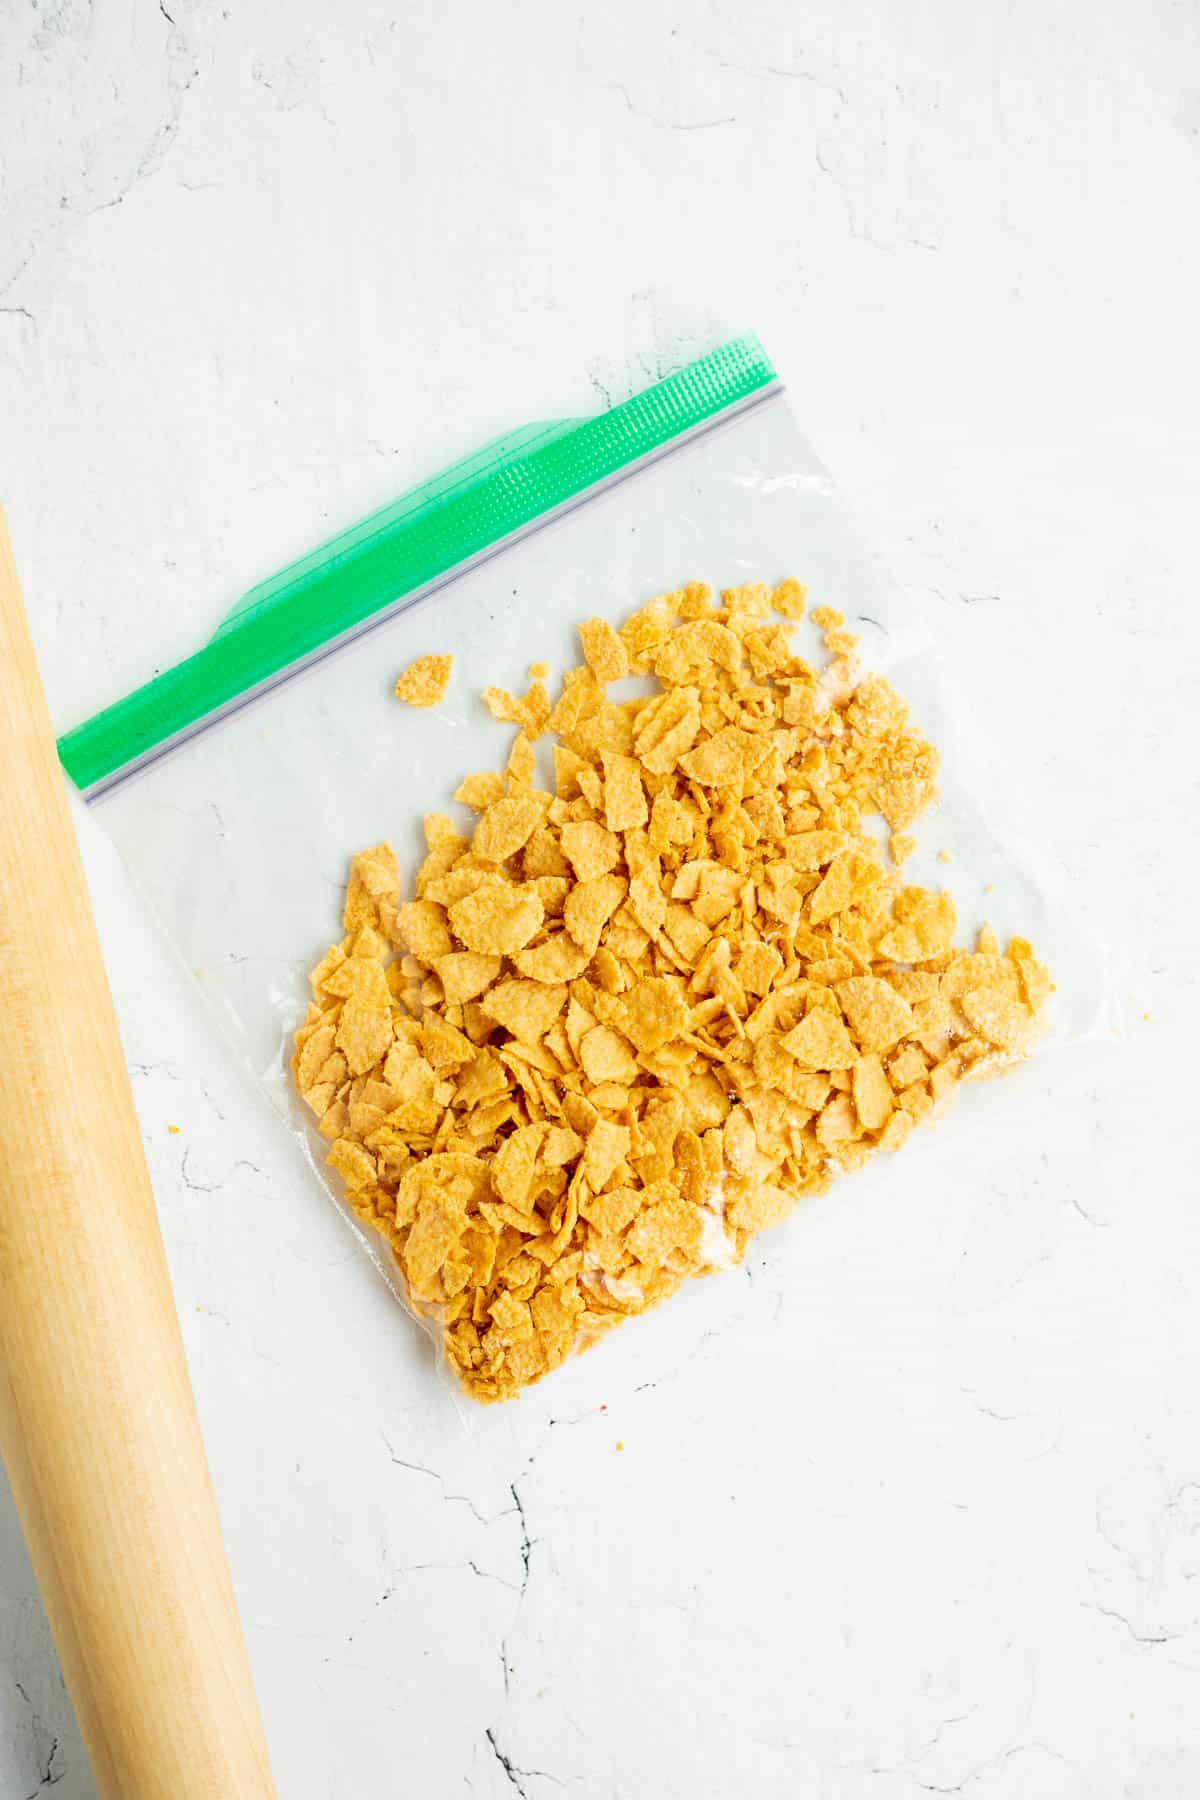 crushed corn flakes in a plastic bag.